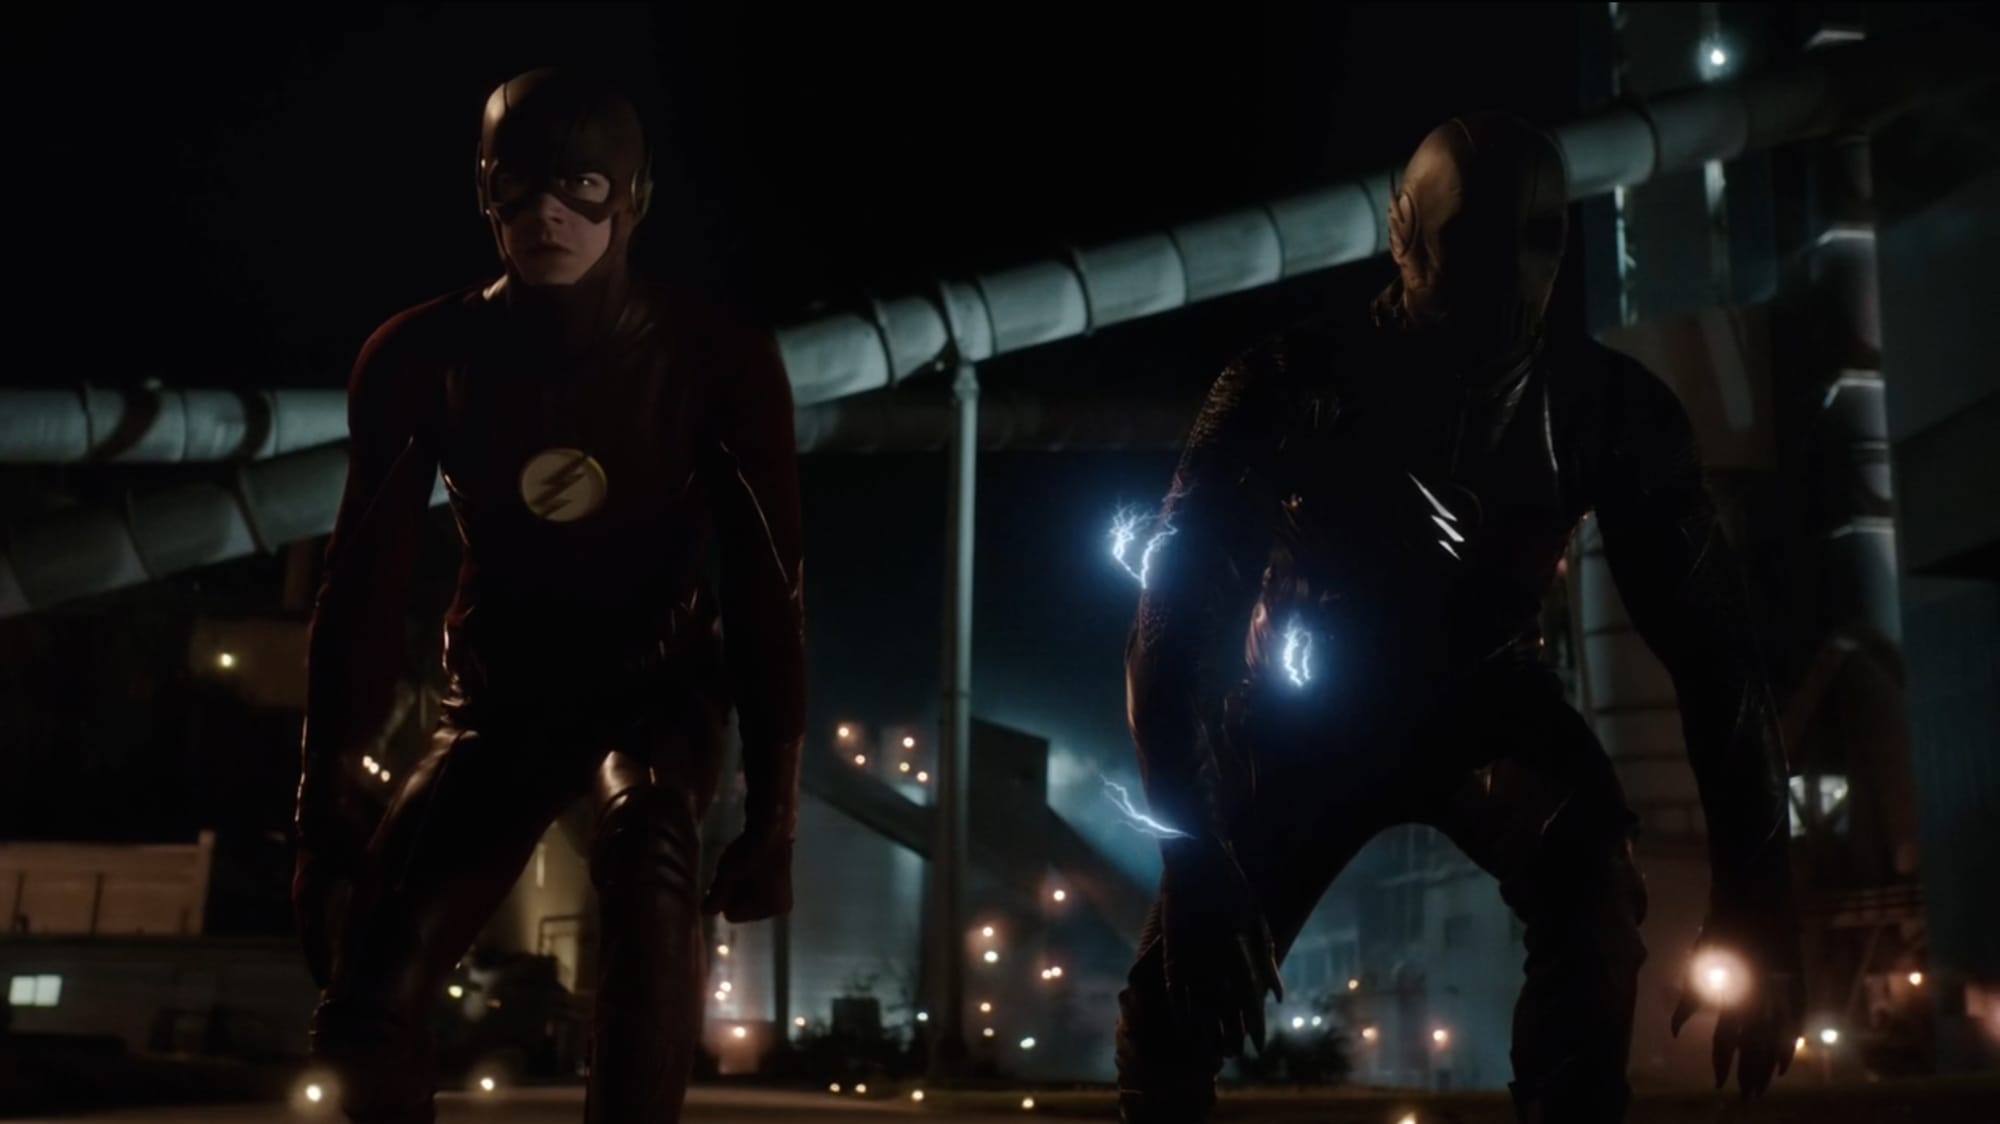 The Flash races Zoom in the season 2 finale. Photo from The CW.